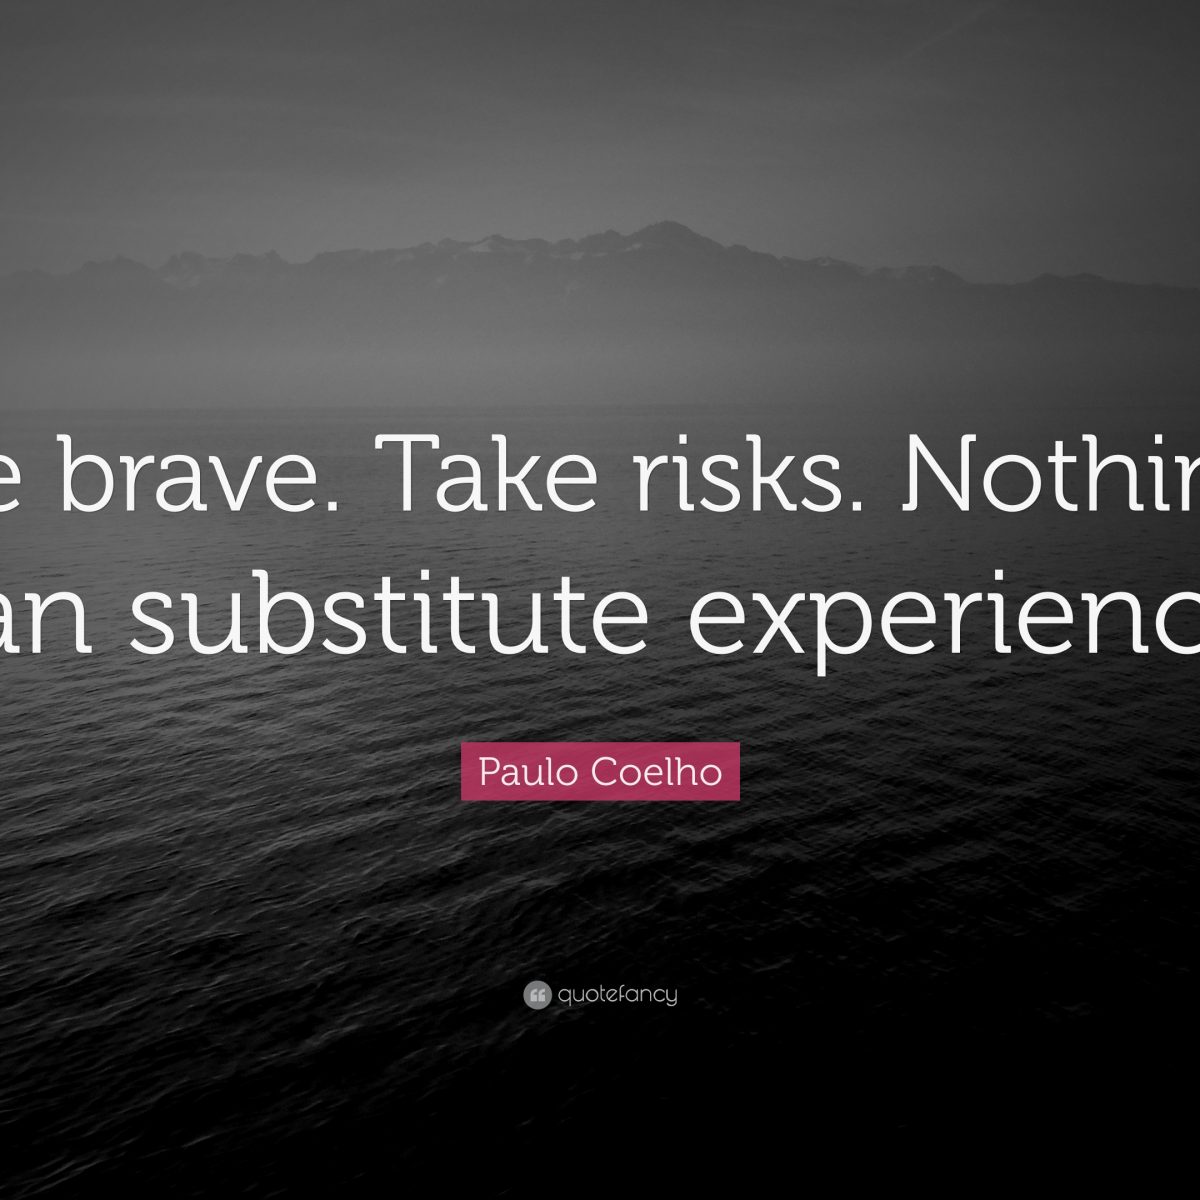 19 Paulo Coelho Quotes to Set You Up for Success